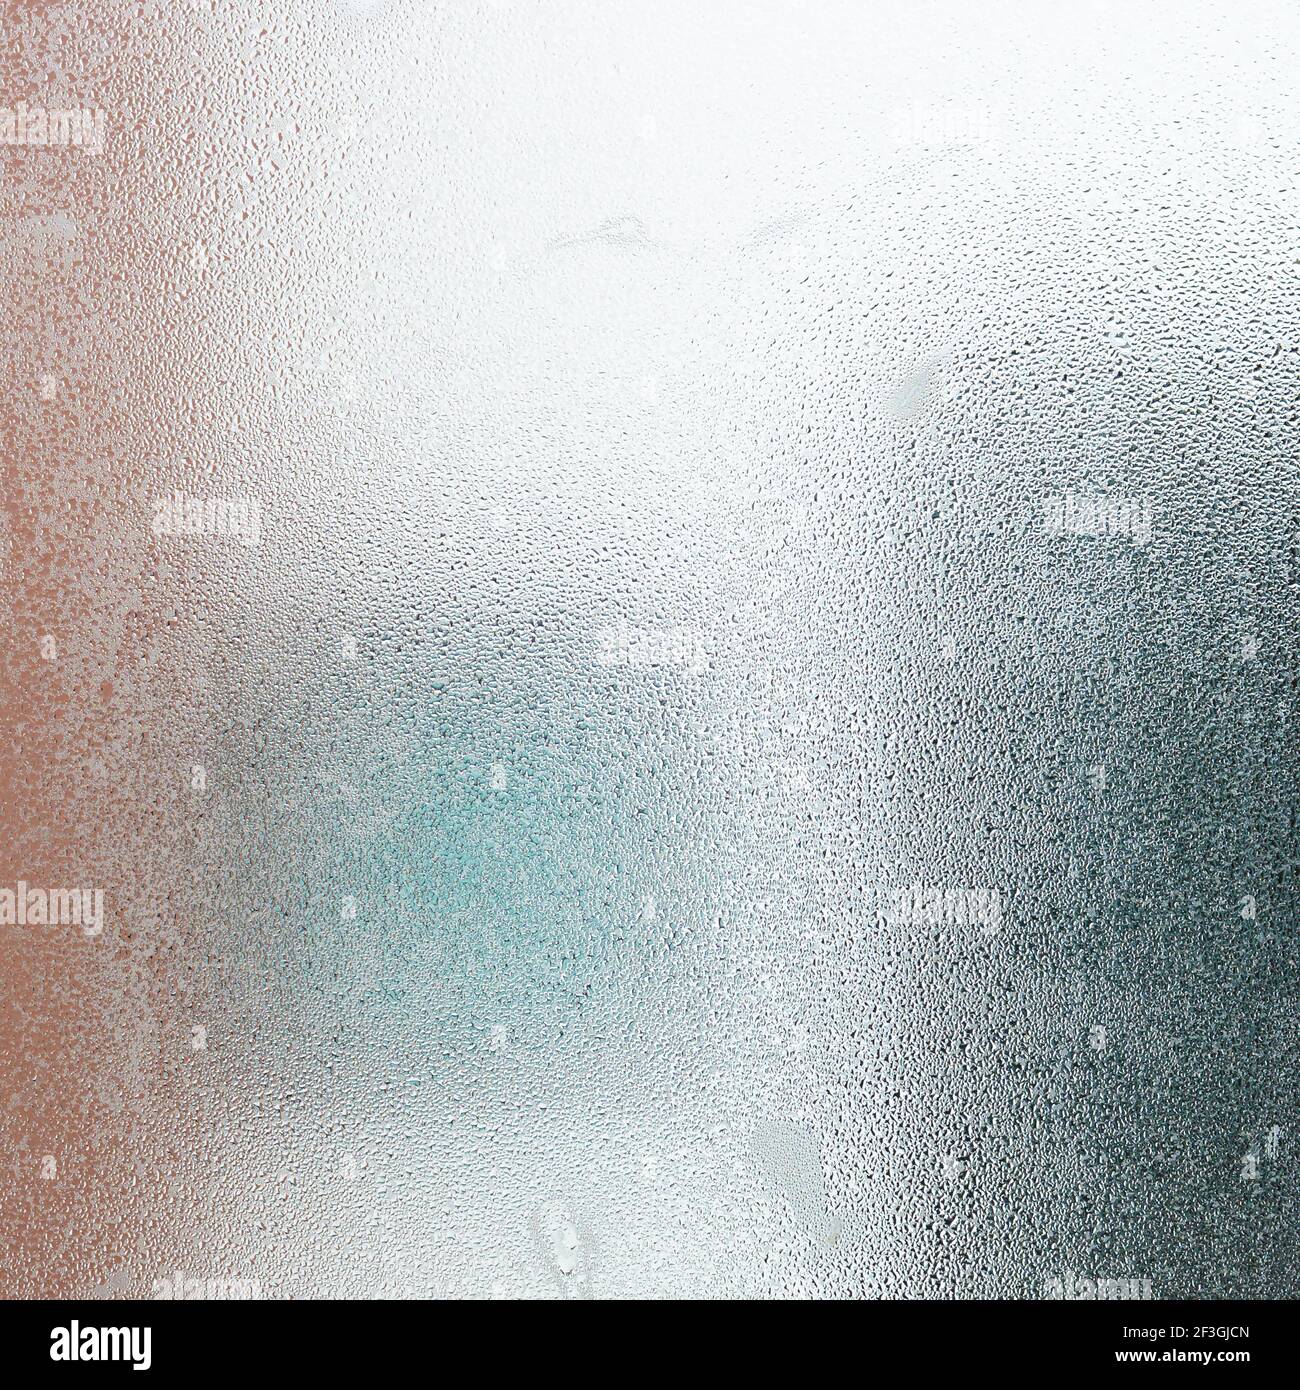 Frosted glass texture with water steam Stock Photo